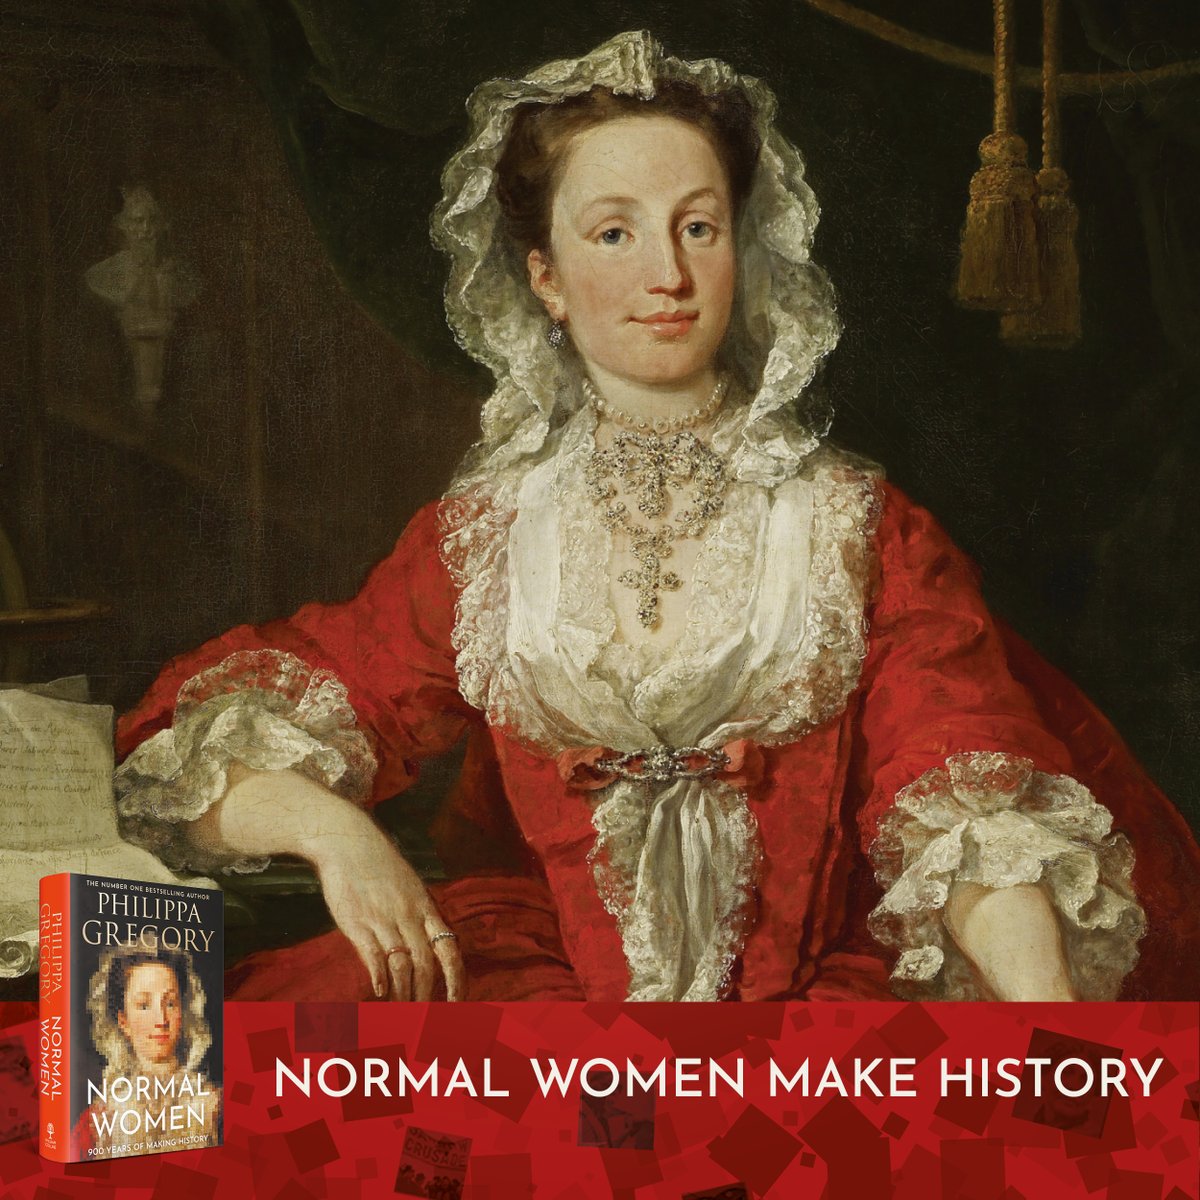 In honour of @PhilippaGBooks #NormalWomen publishing today, we'll be sharing some of the incredible women featured within its pages. First we have Mary Edwards, courageous wife willing to risk everything to free herself from a thieving husband. Out now: ow.ly/j8f050PTEFO